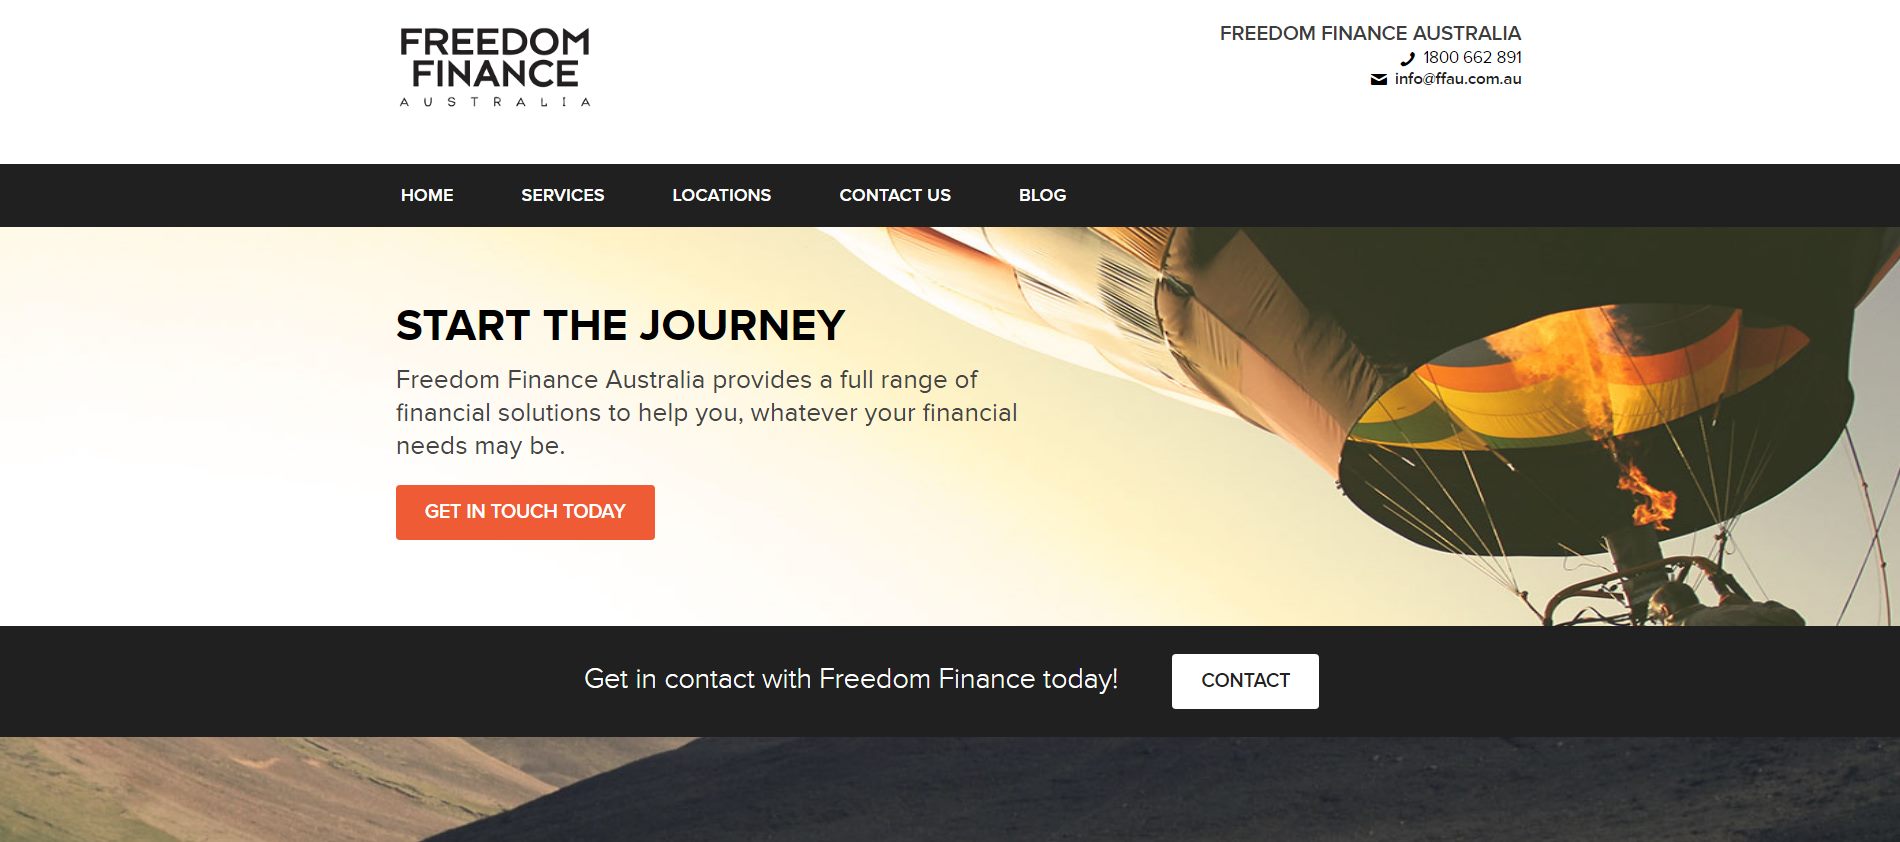 freedom finance financial planners & advisors melbourne